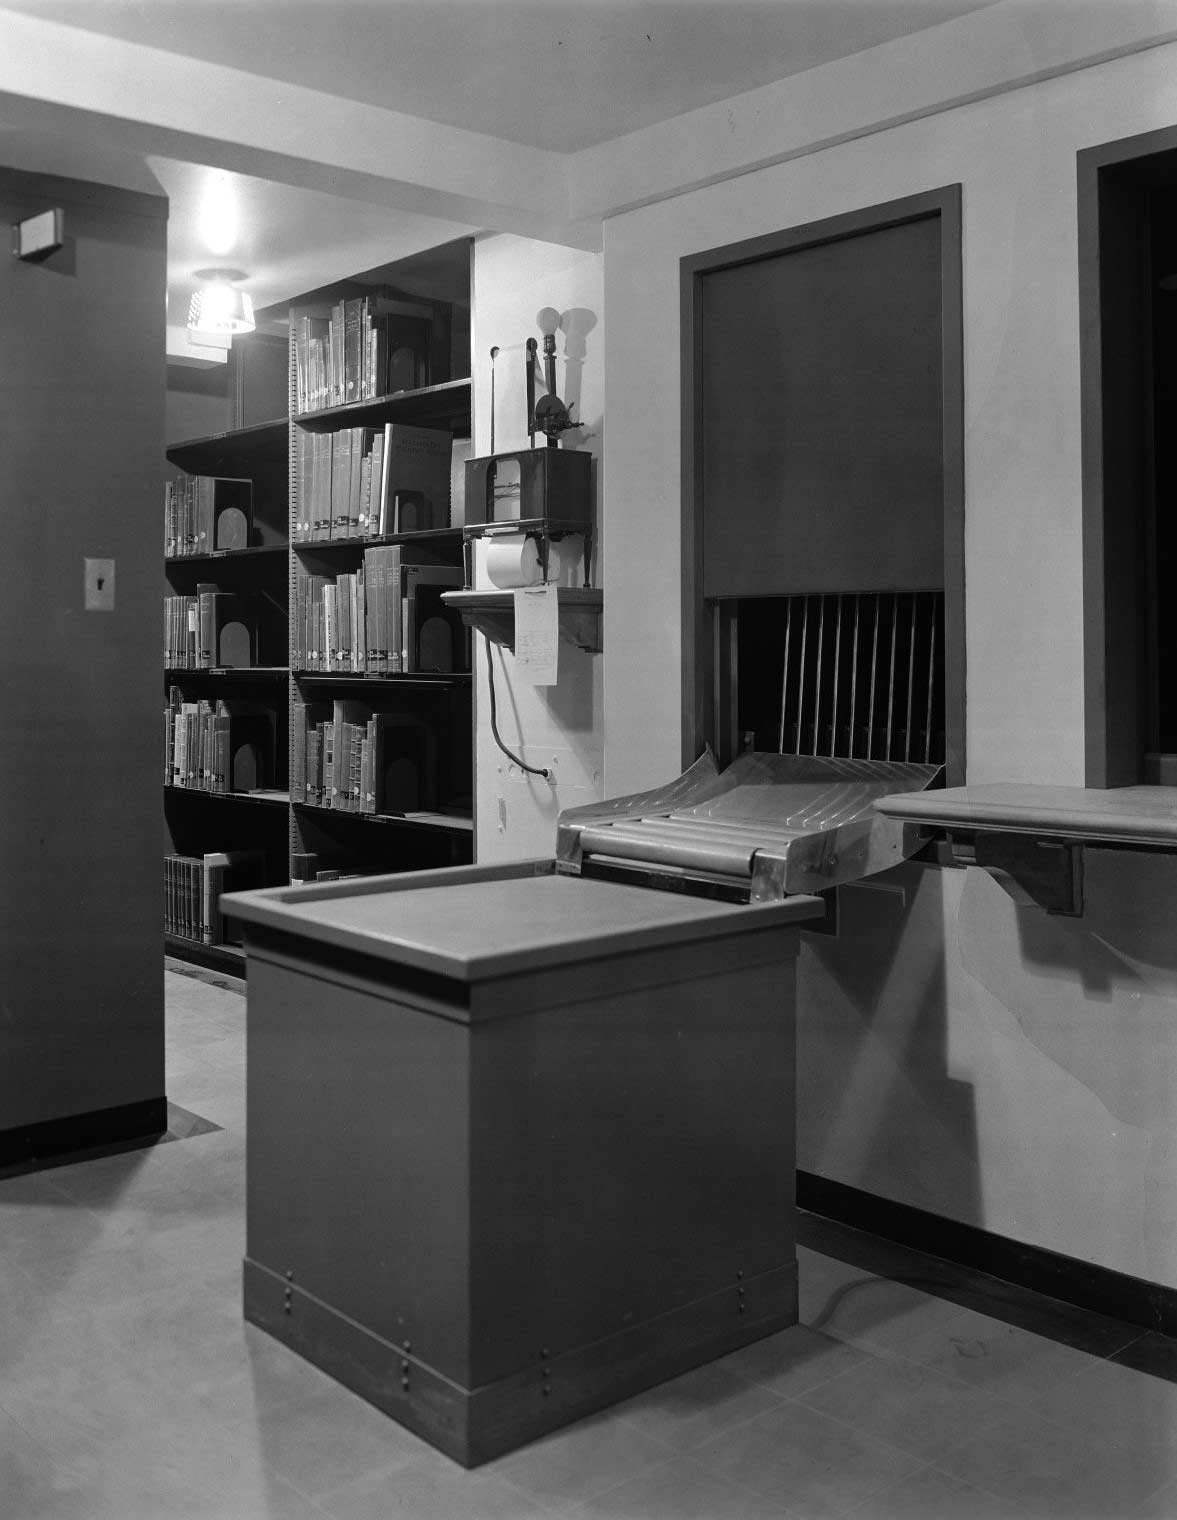 A station next to library book stacks with a desk, a telautograph machine, and a dumbwaiter